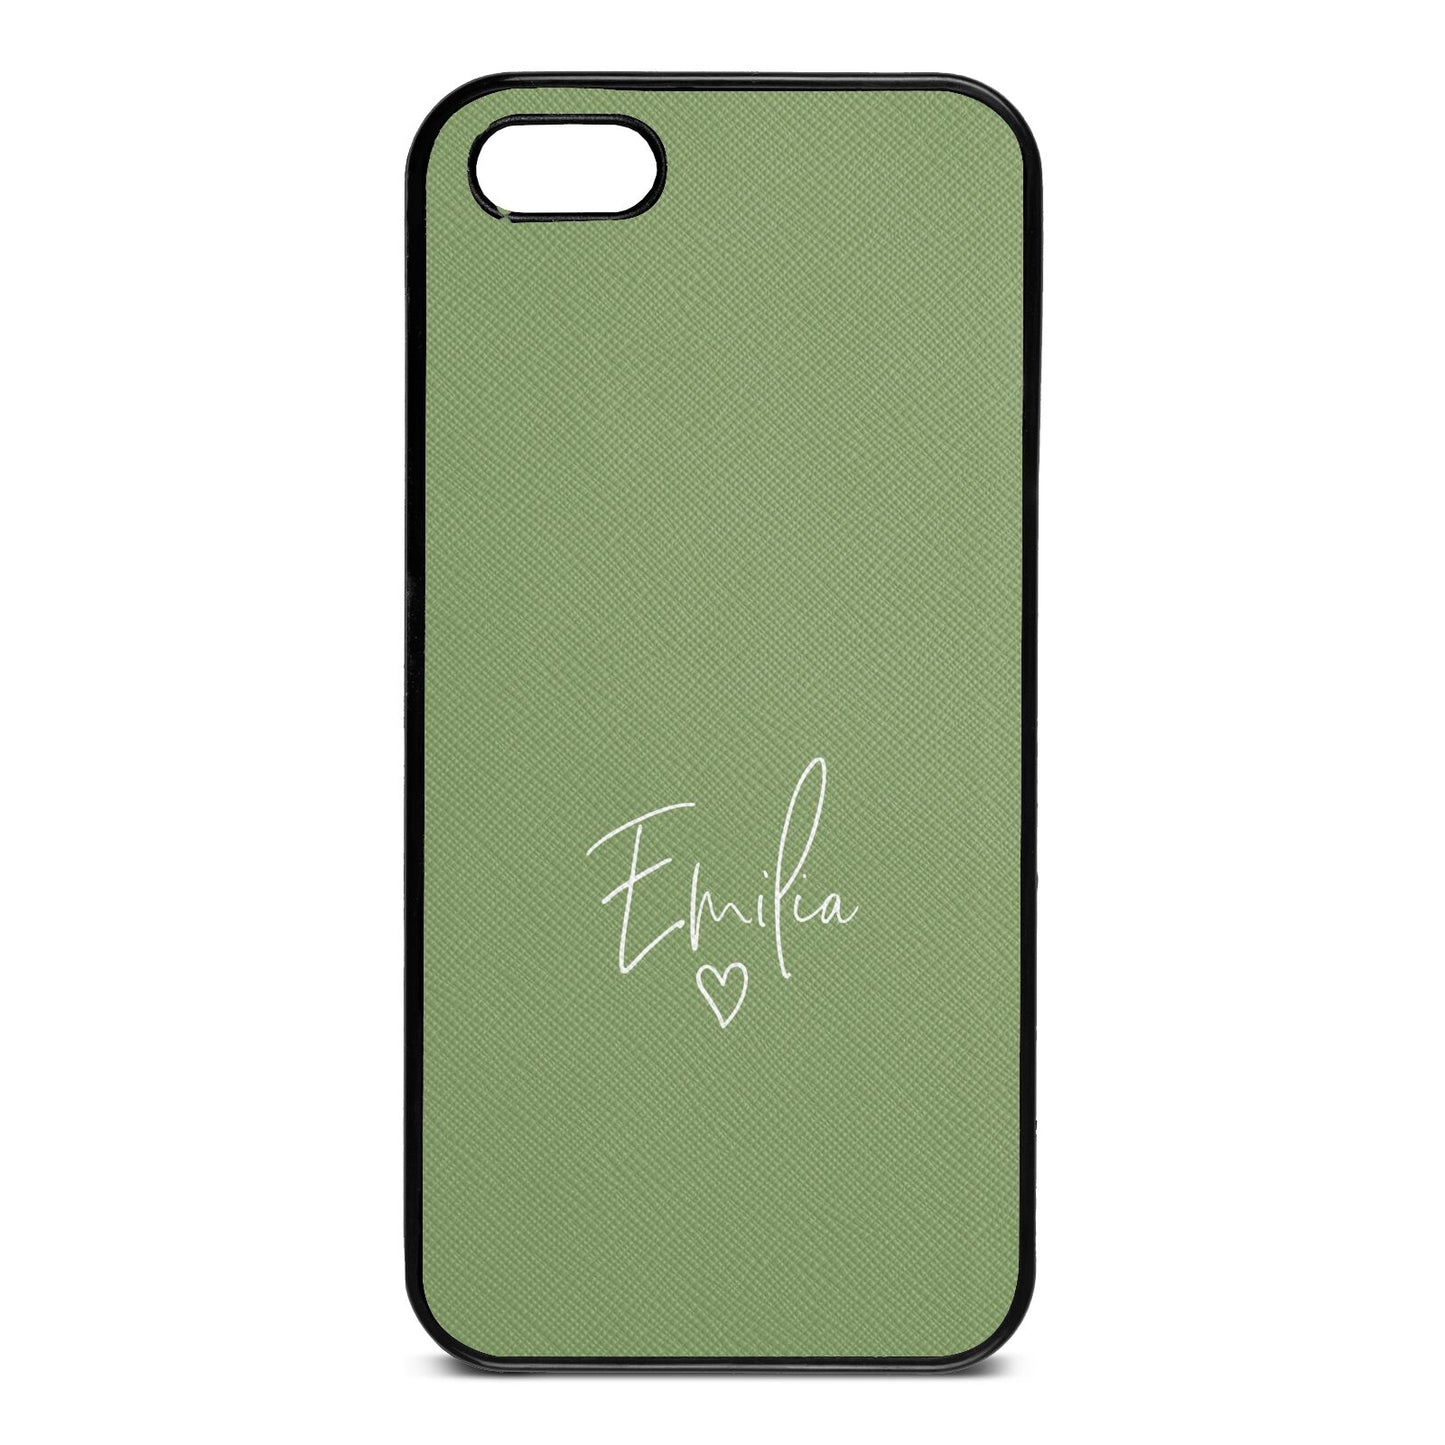 White Handwritten Name Transparent Lime Saffiano Leather iPhone 5 Case